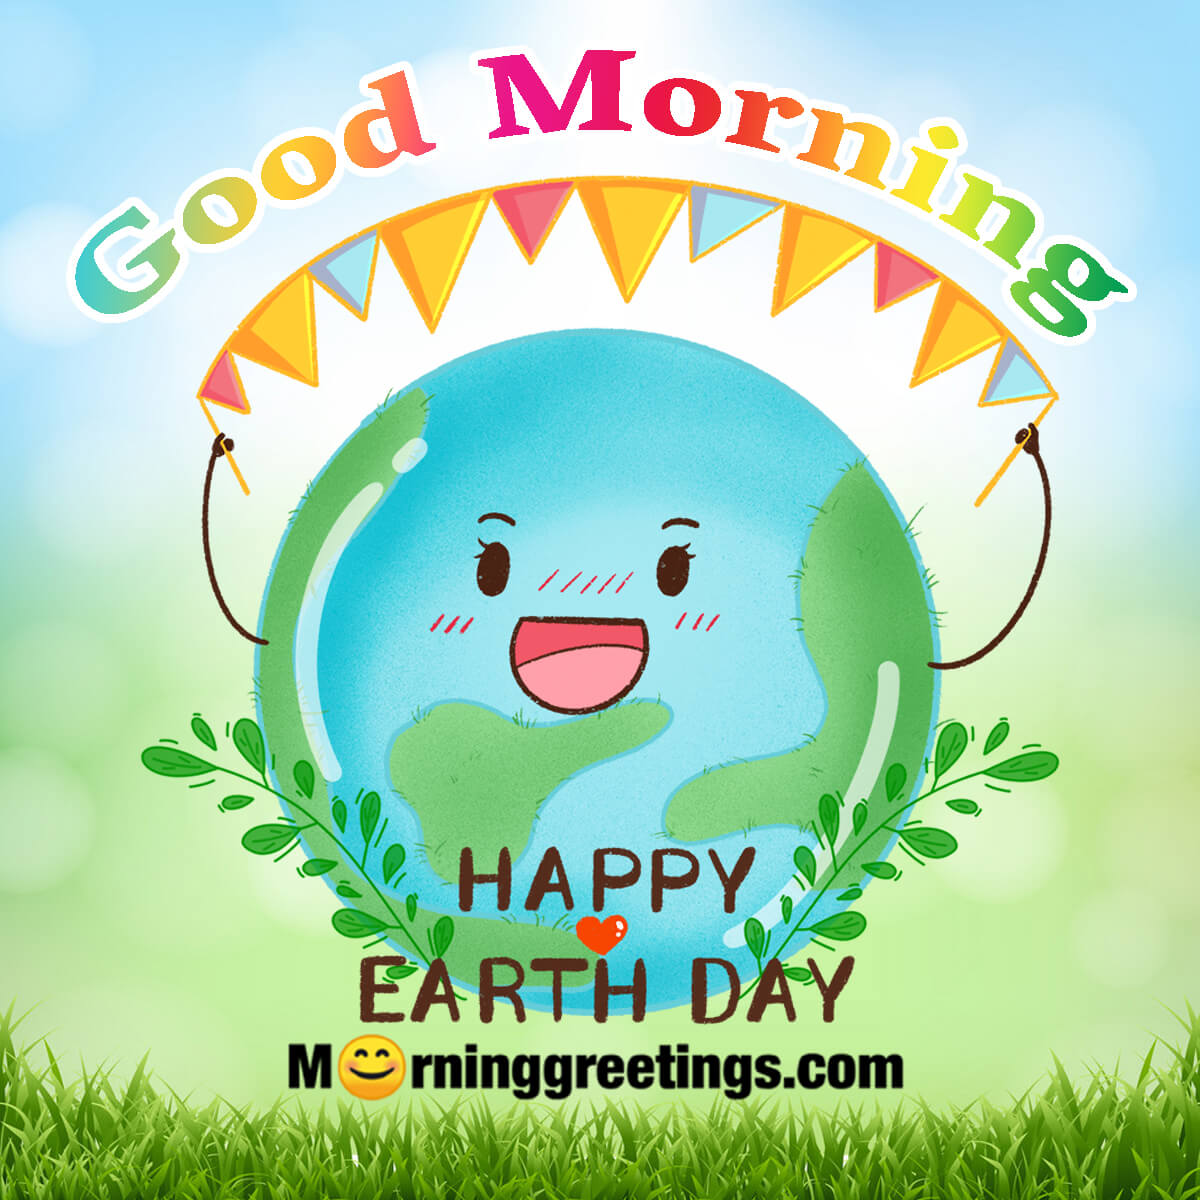 Good Morning Happy Earth Day Greeting